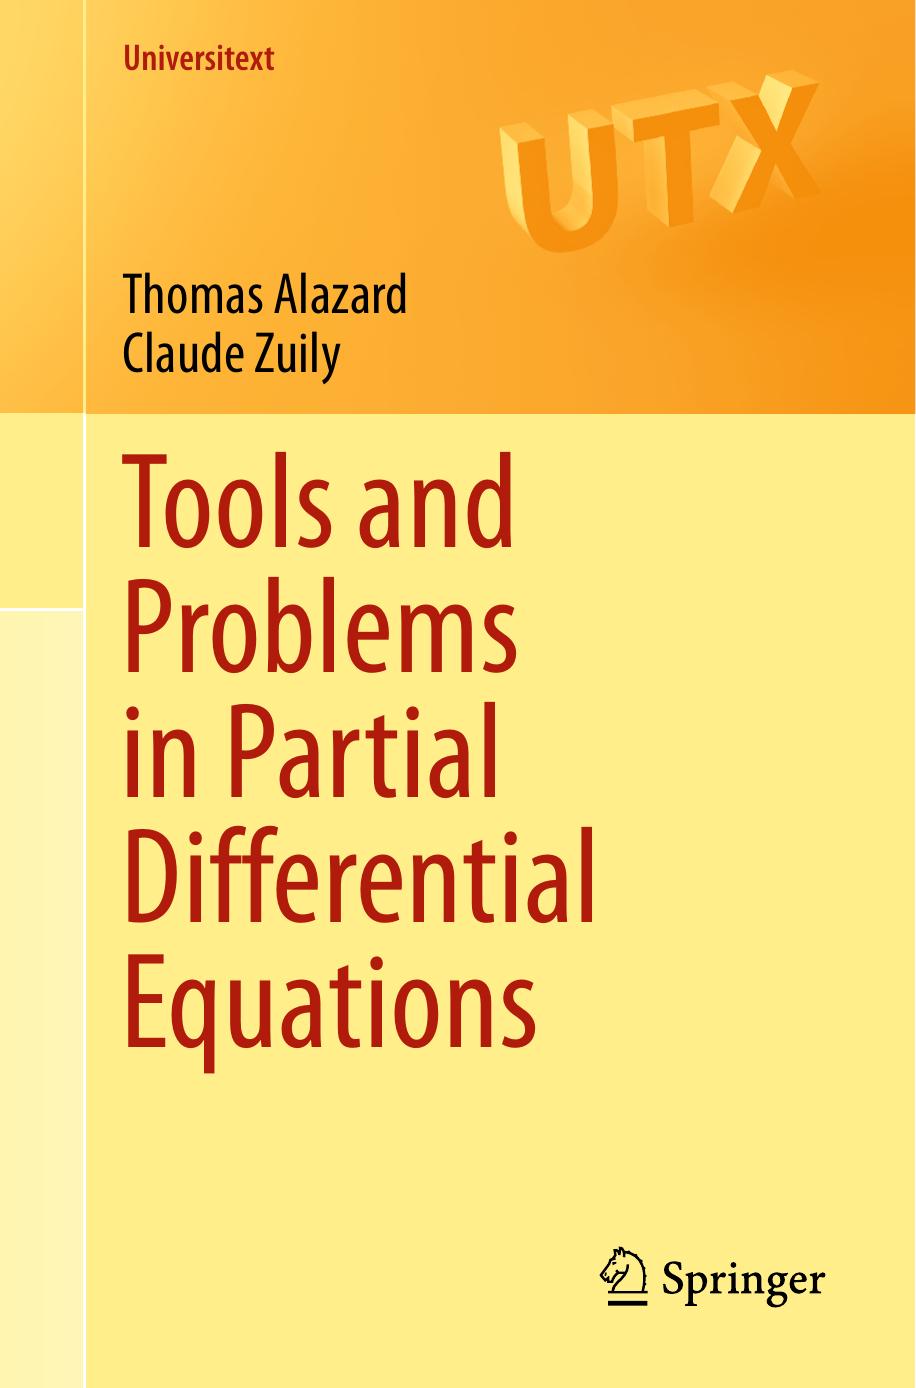 Tools and Problems in Partial Differential Equations by Thomas Alazard & Claude Zuily